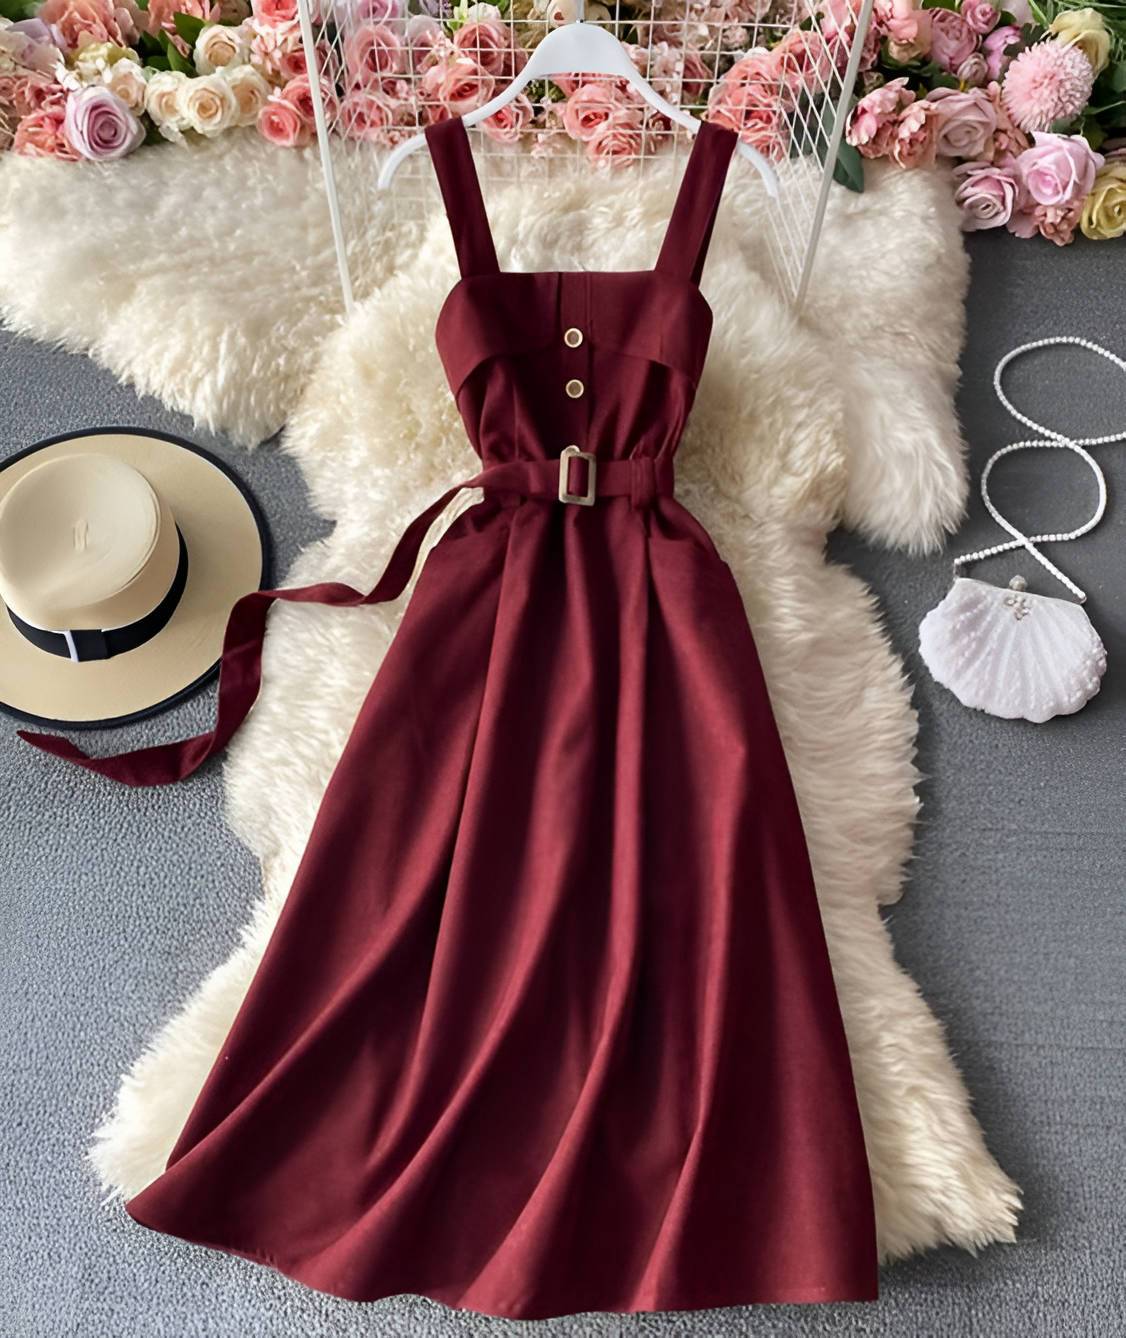 20 Stunning Outfit Ideas To Rock Your Red Dress - 171